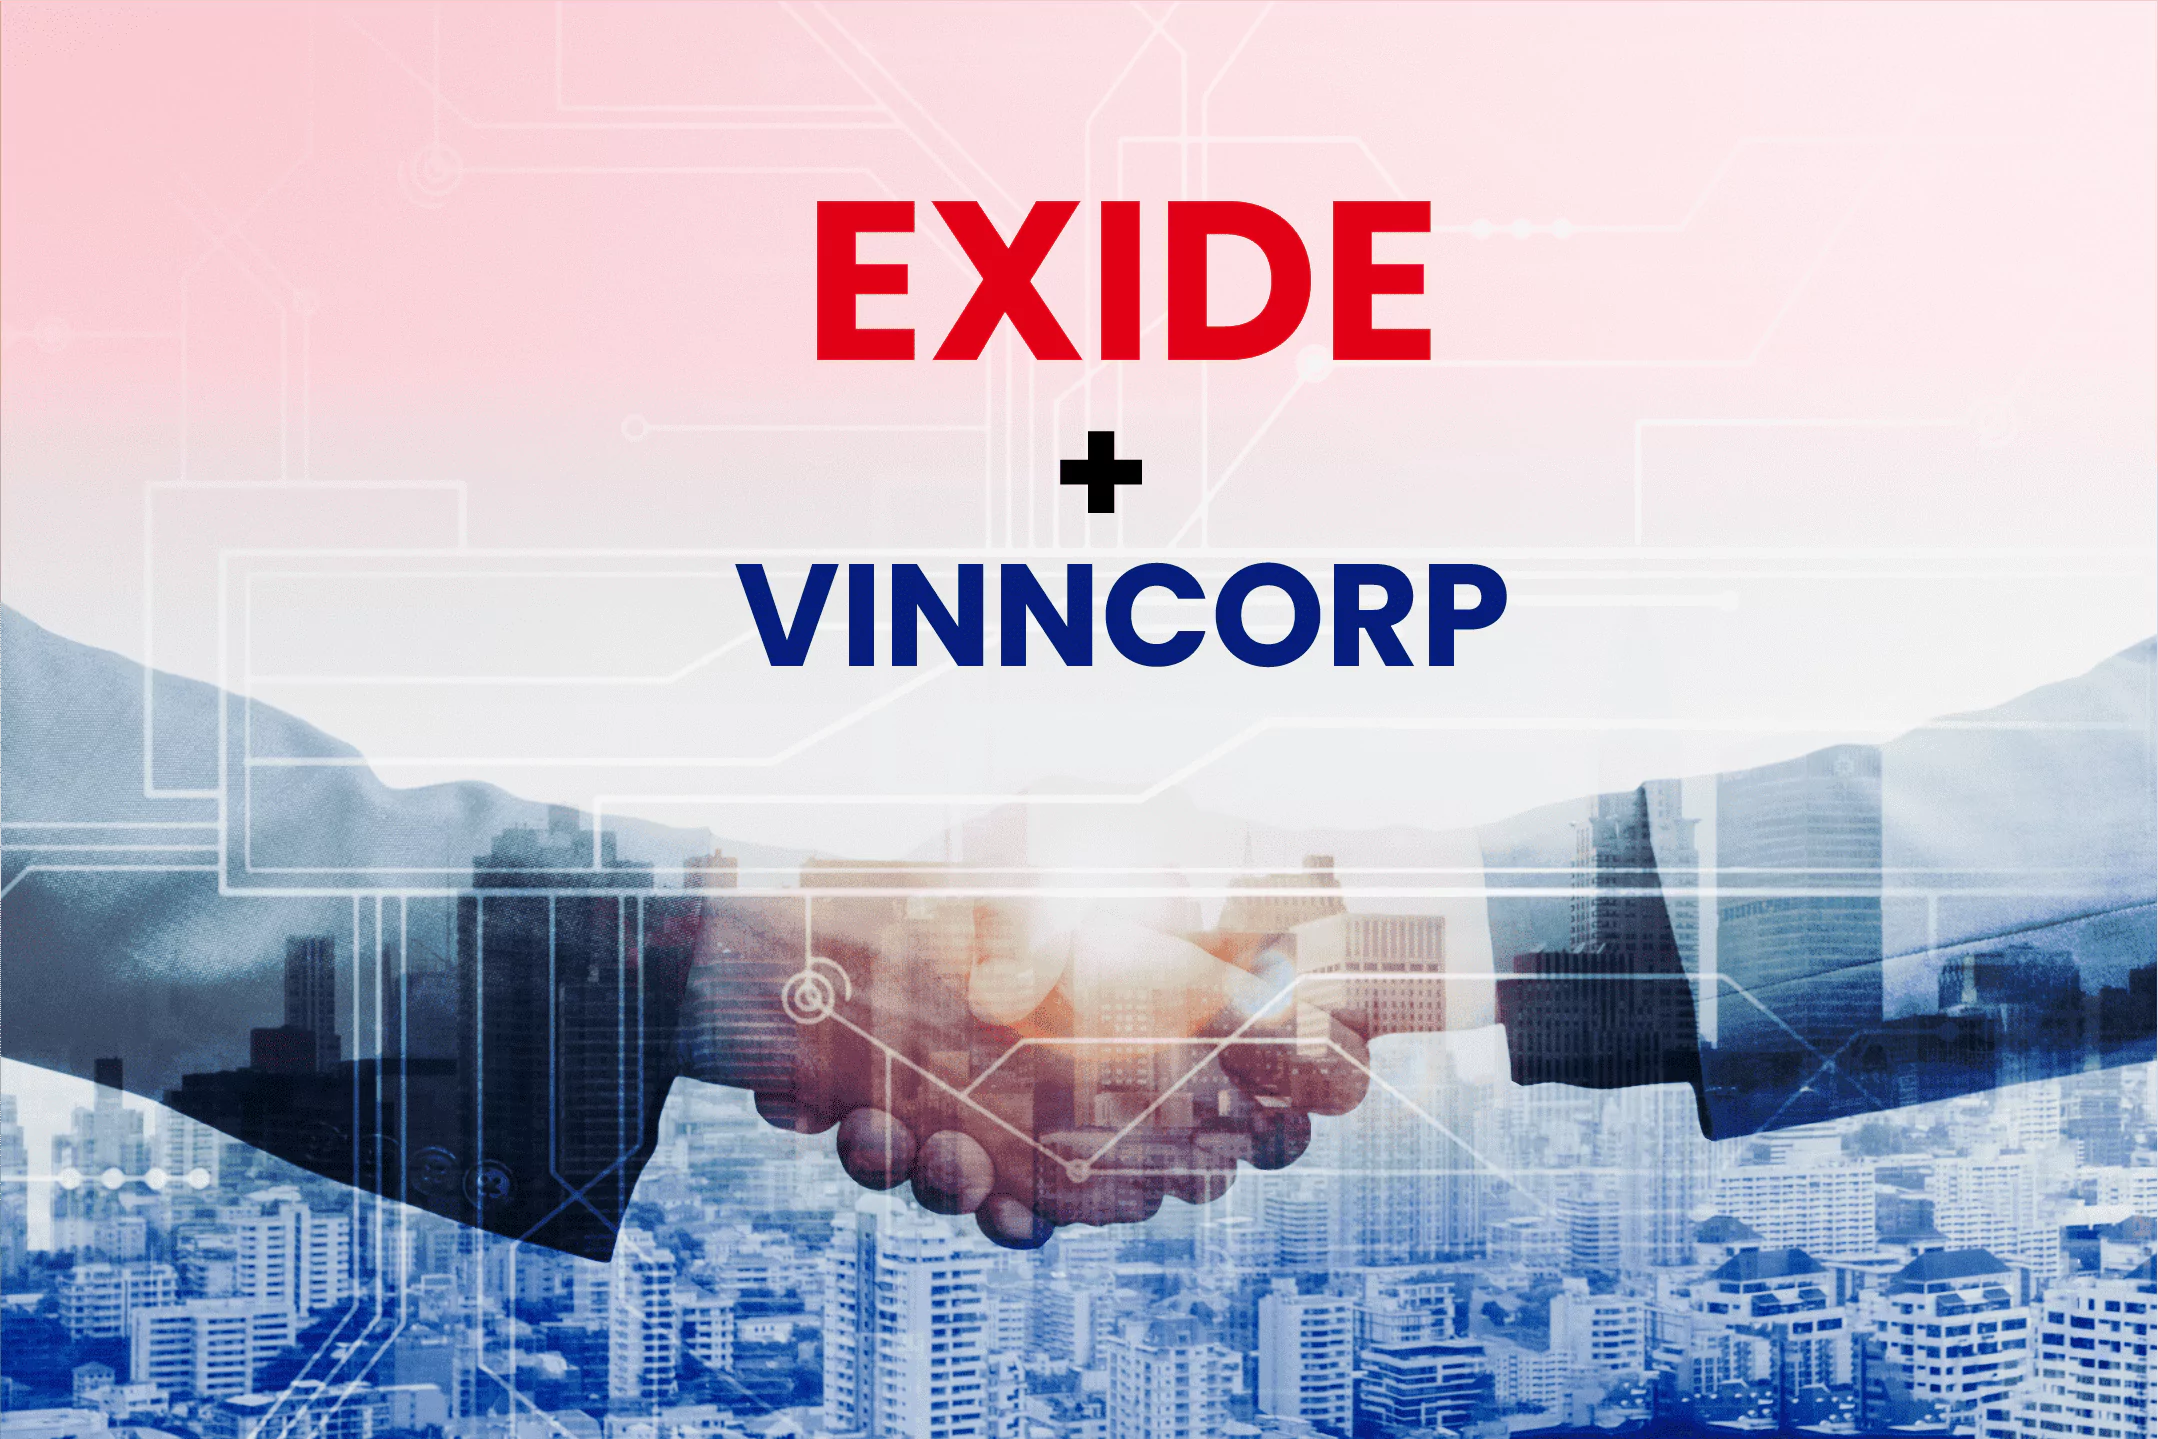 The Partnership Exide and VinnCorp